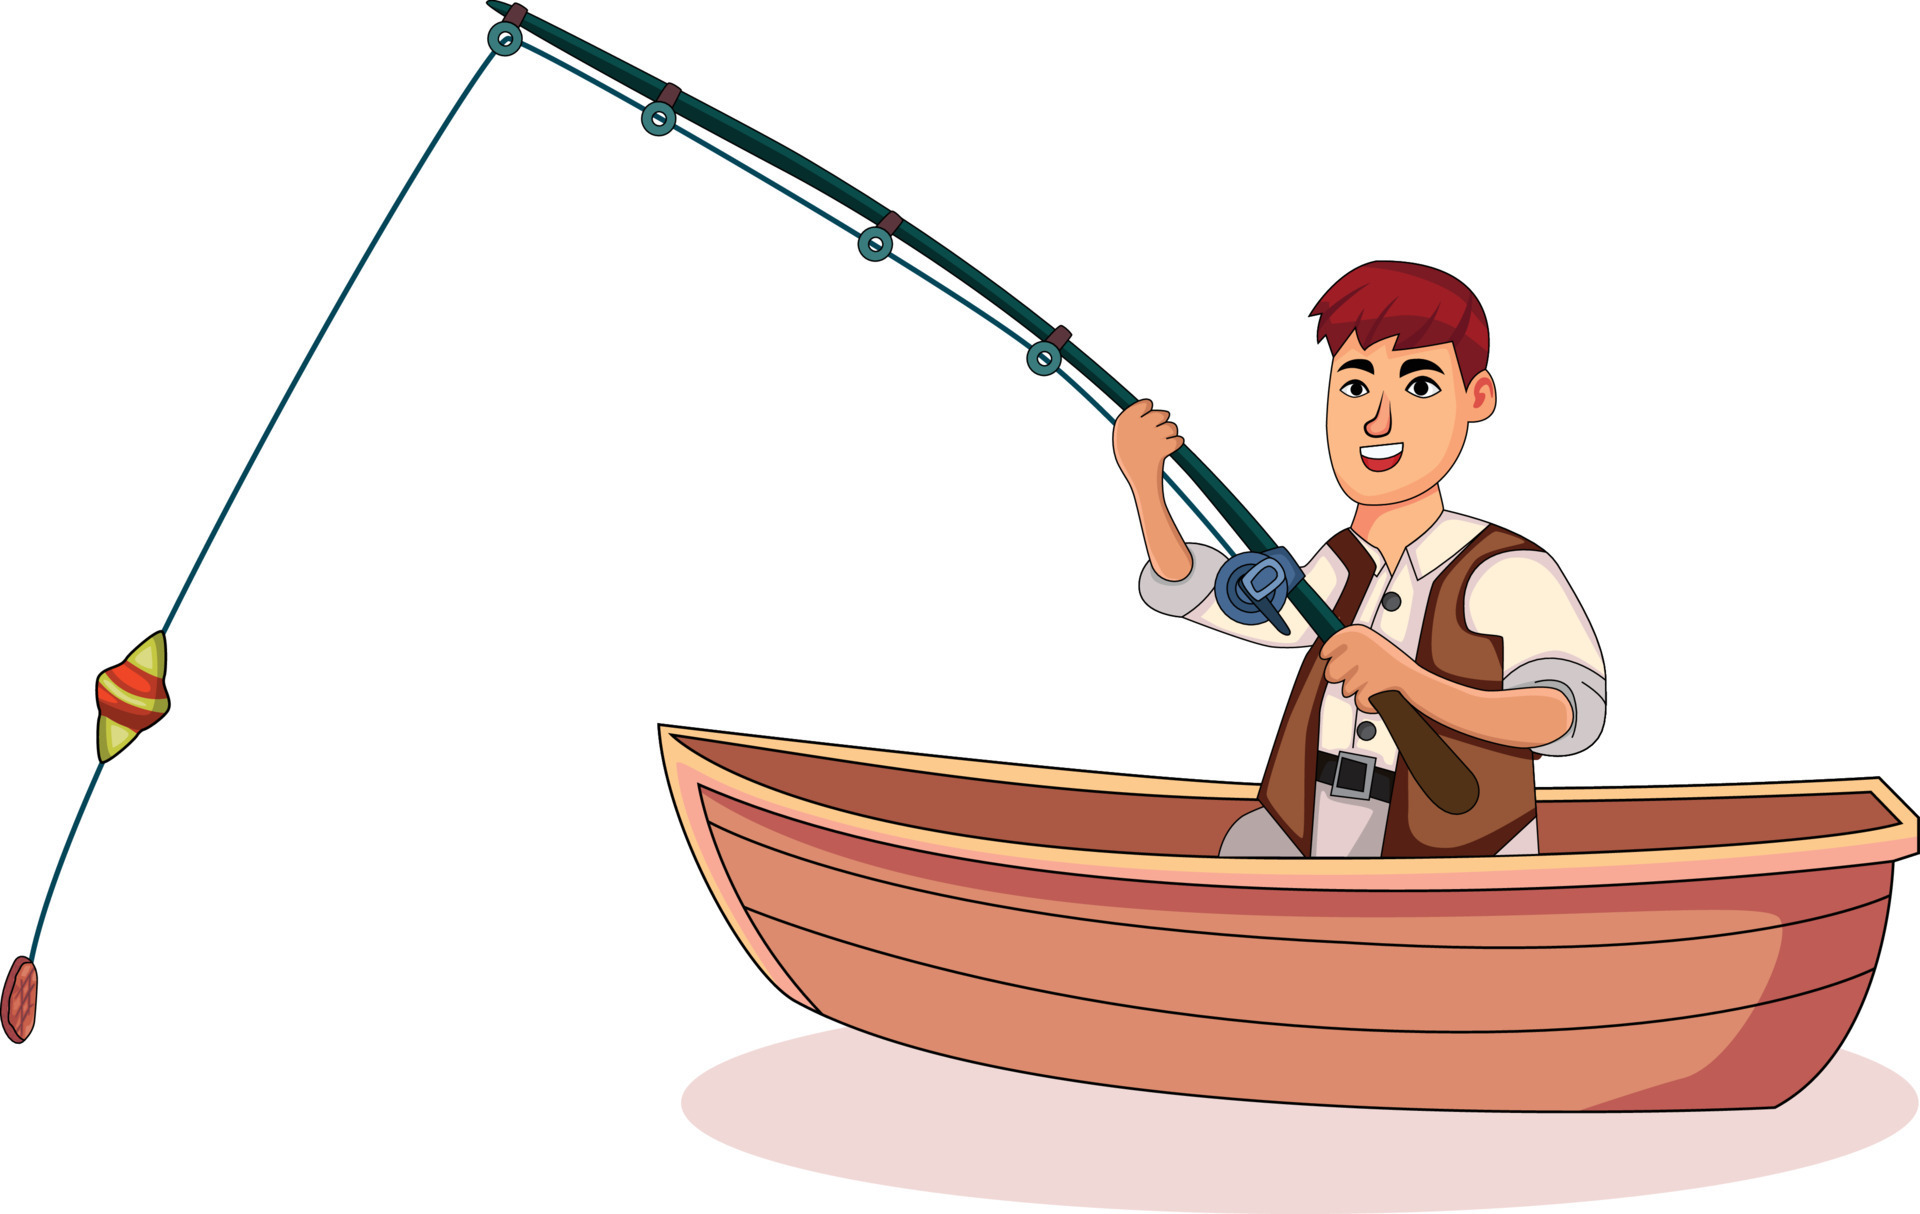 https://static.vecteezy.com/system/resources/previews/021/846/975/original/fisherman-catching-fish-on-the-boat-cartoon-scene-vector.jpg